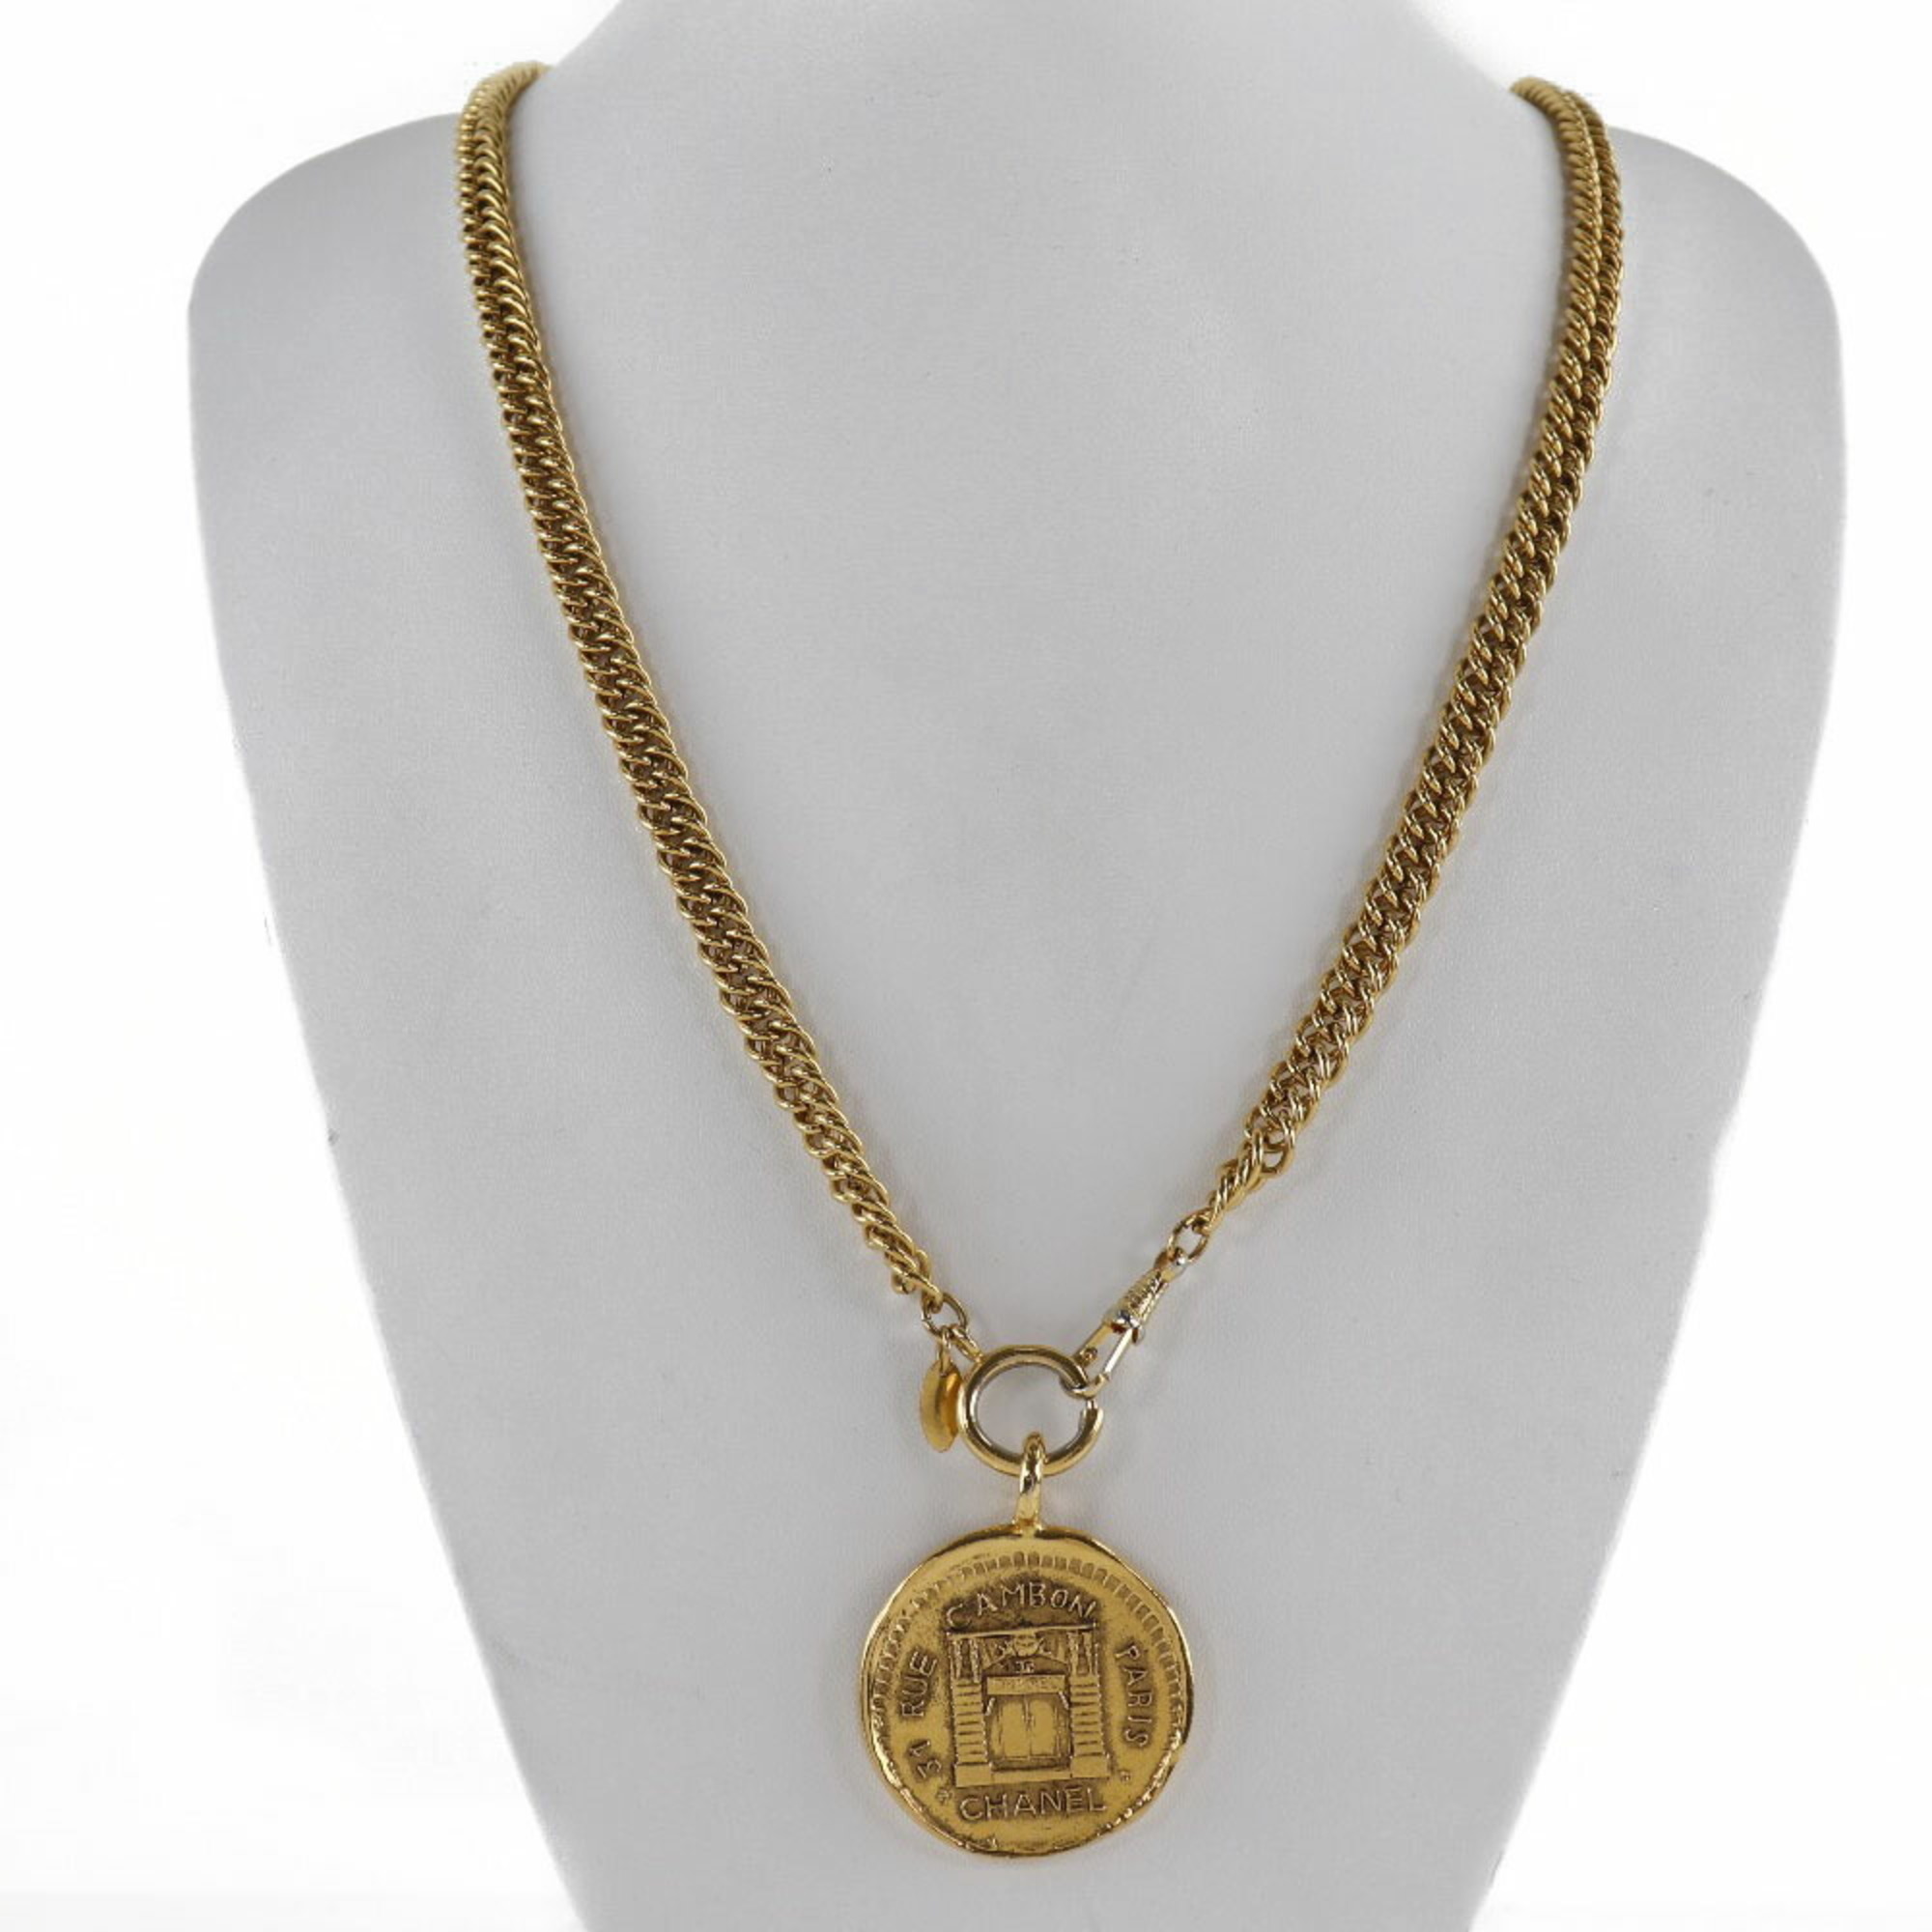 CHANEL Chanel coin 31 RUE CAMBON vintage gilding Lady's necklace